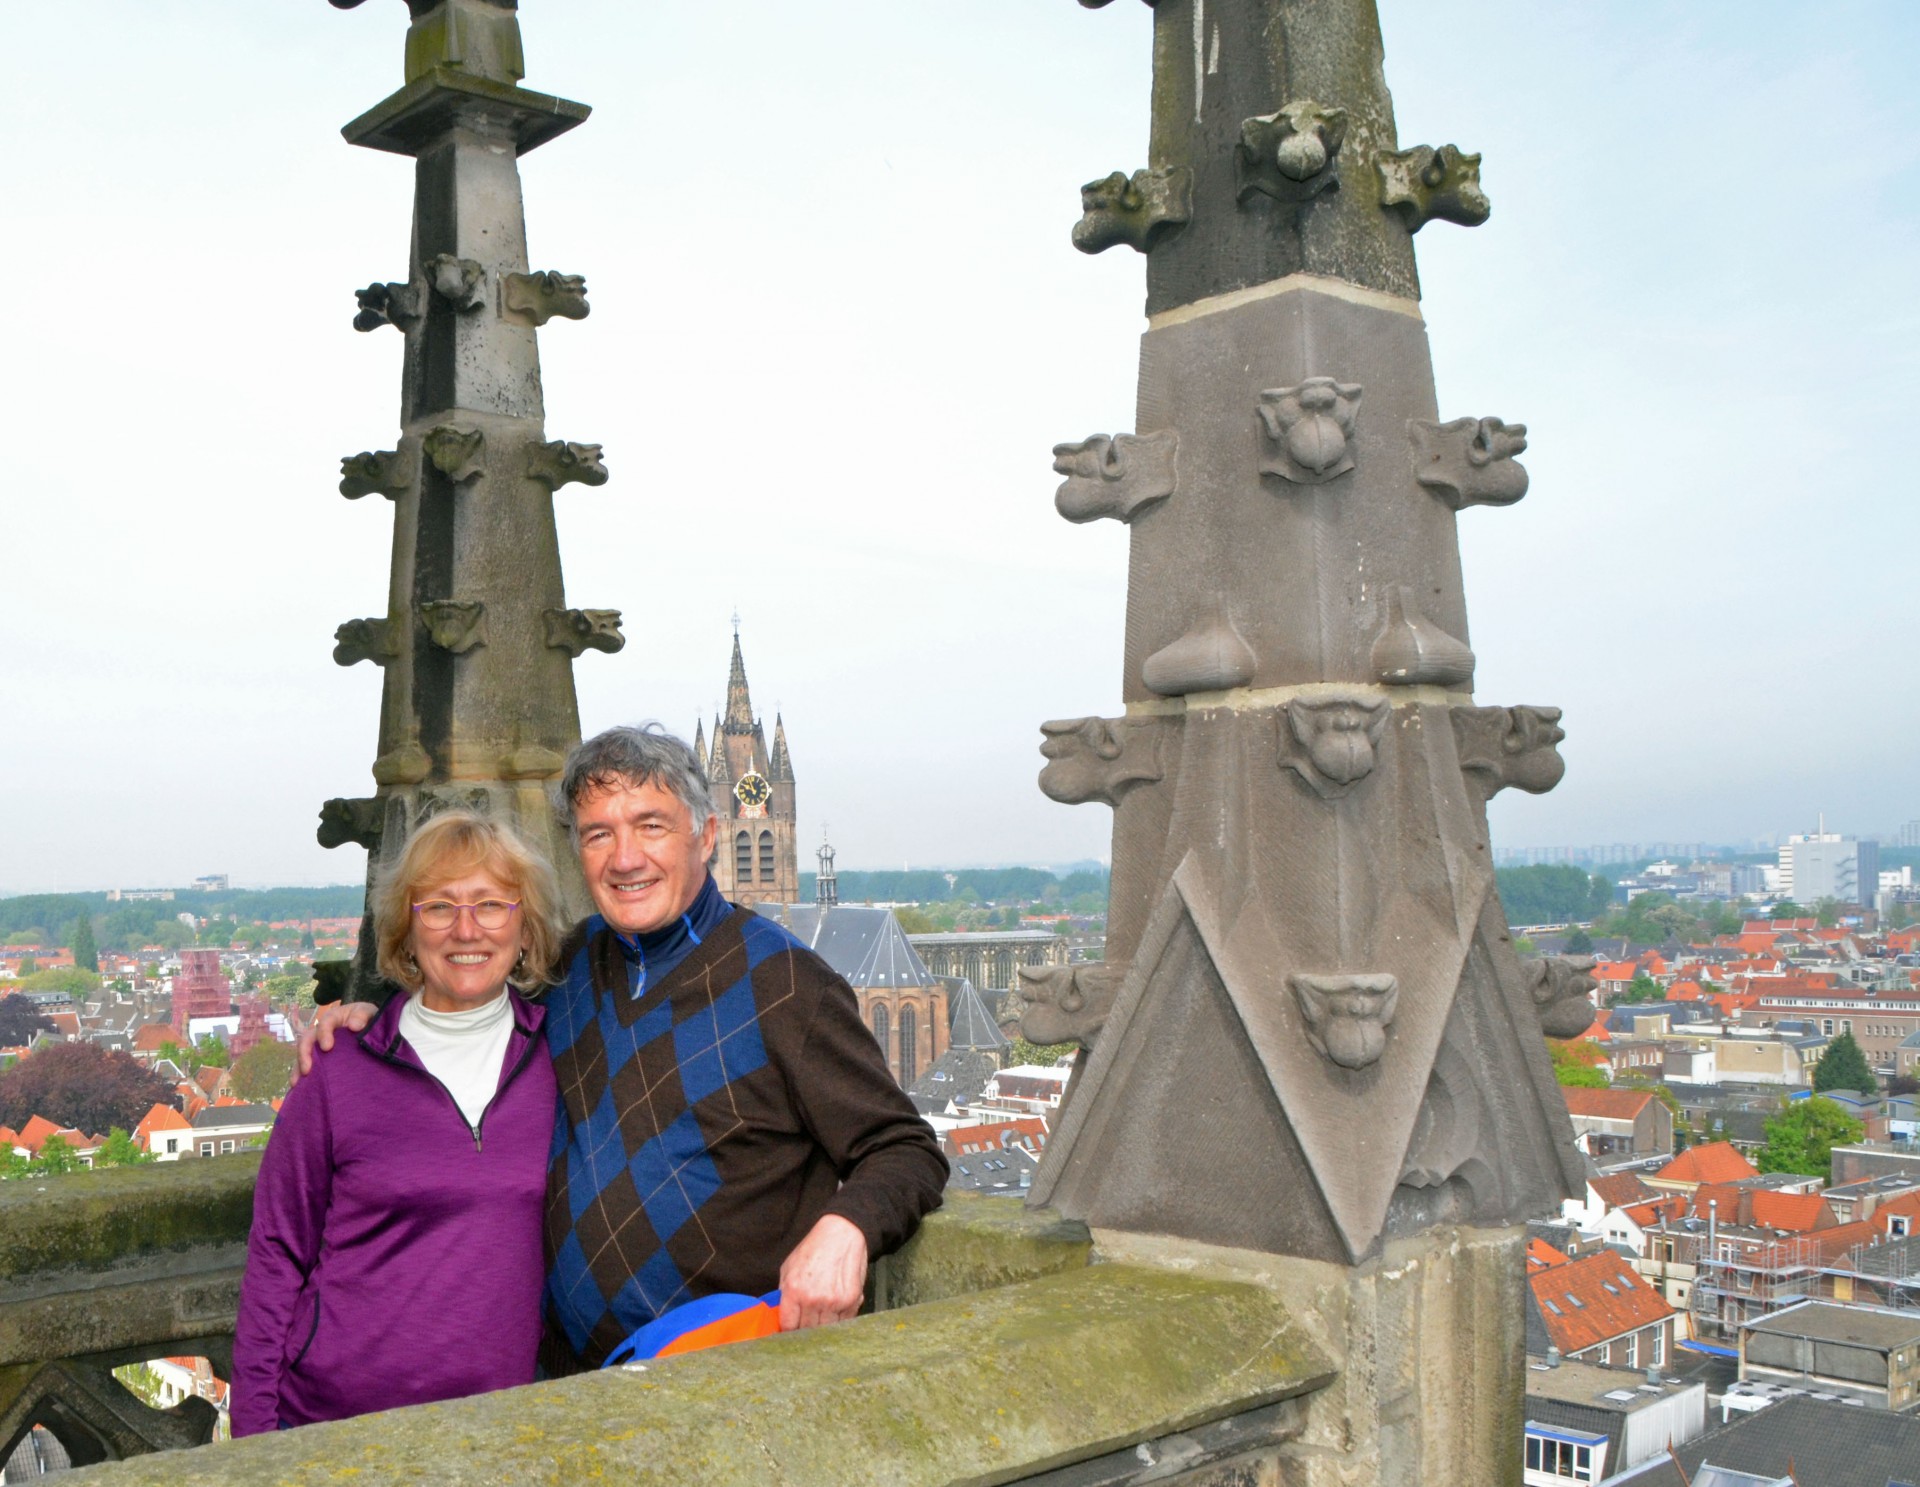 Dale and Alison's view of Delft